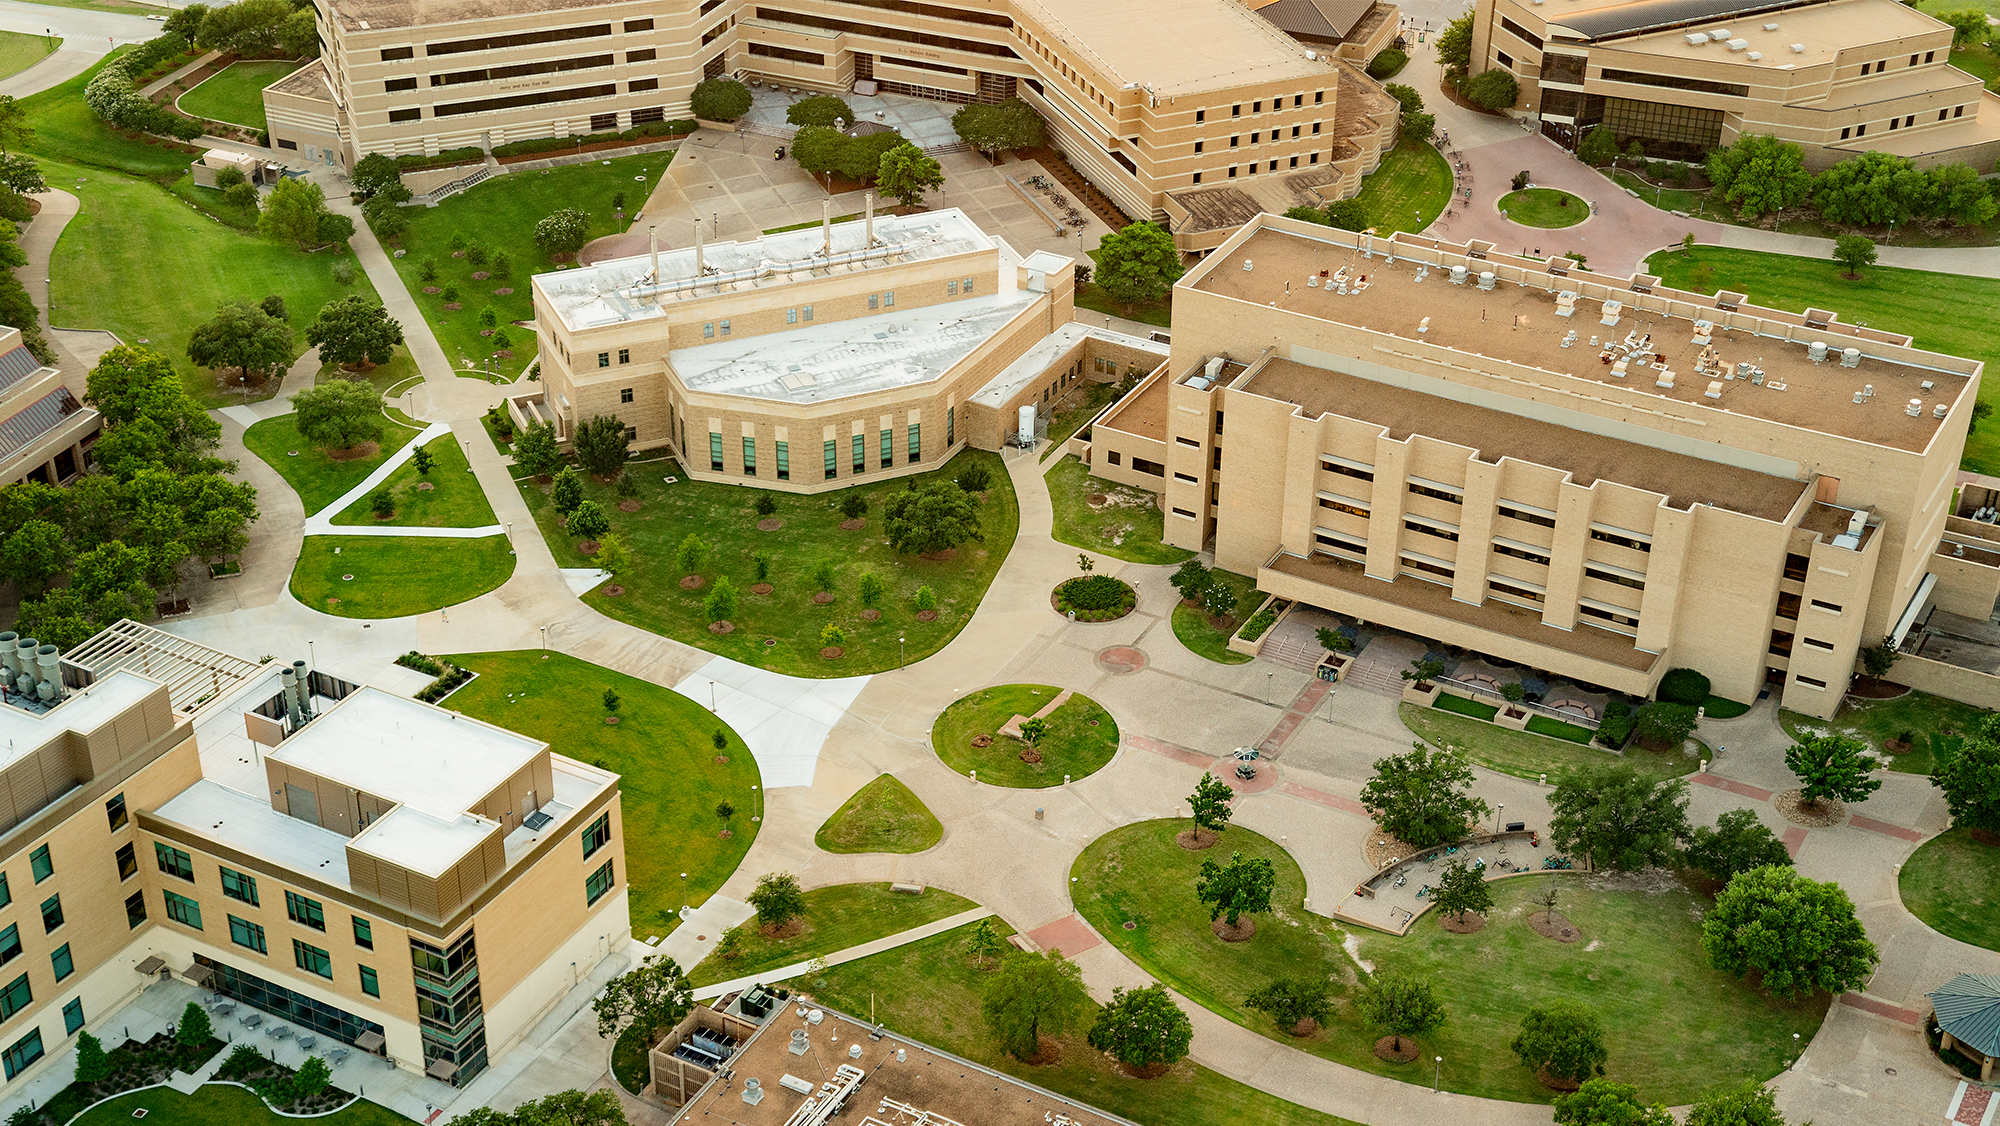 west campus of Texas A&M University, a couple buildings and sidewalks